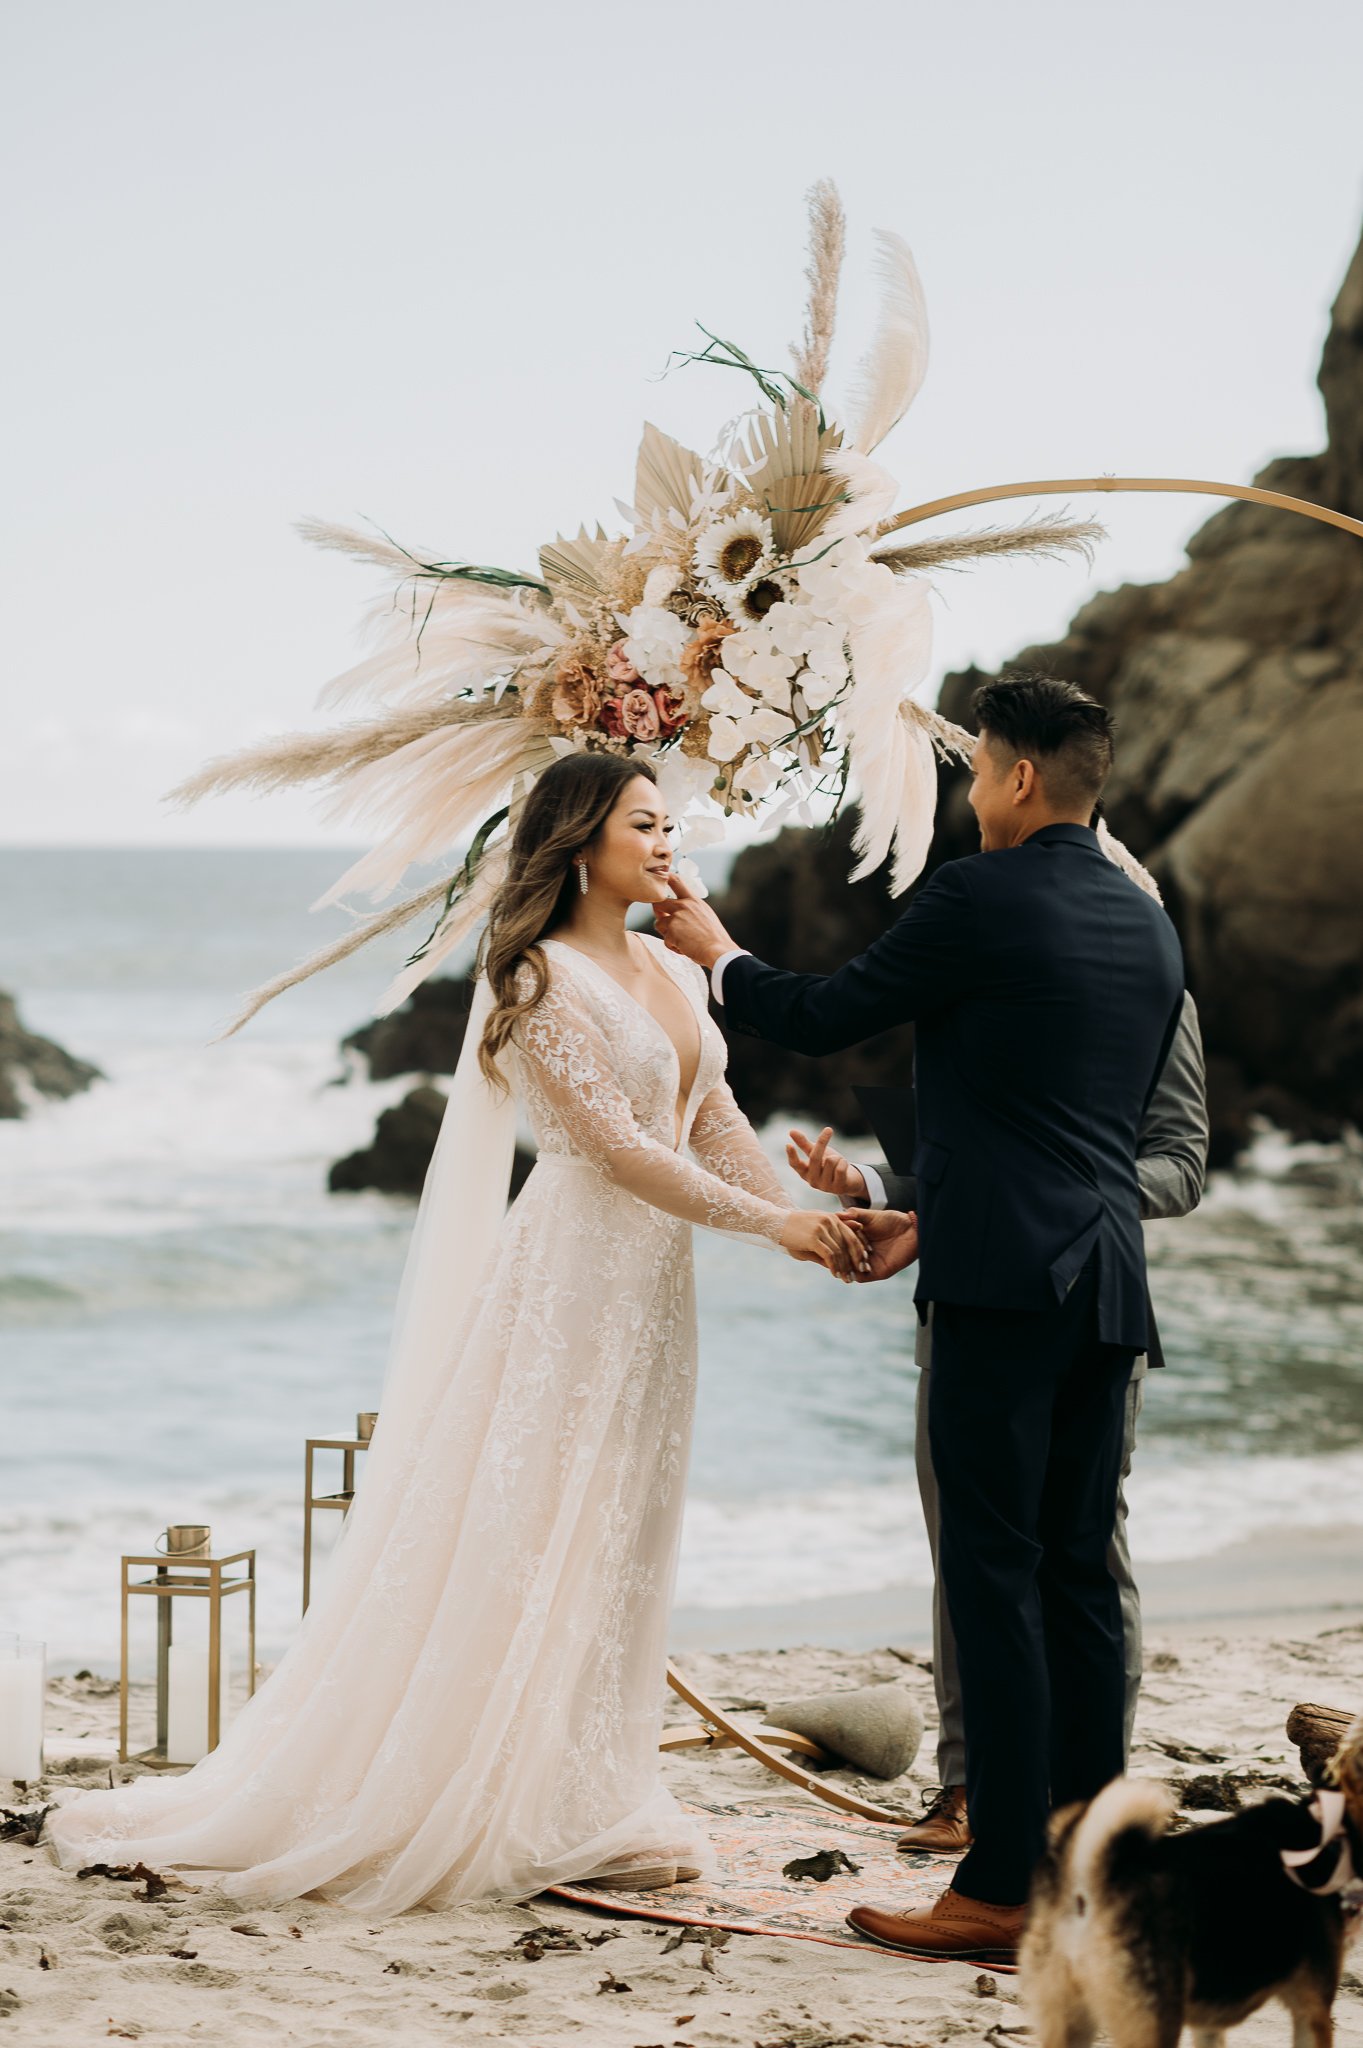 Bride and groom in wedding attire standing under a wedding arch with white flowers and feathers at Pfeiffer Beach Big Sur